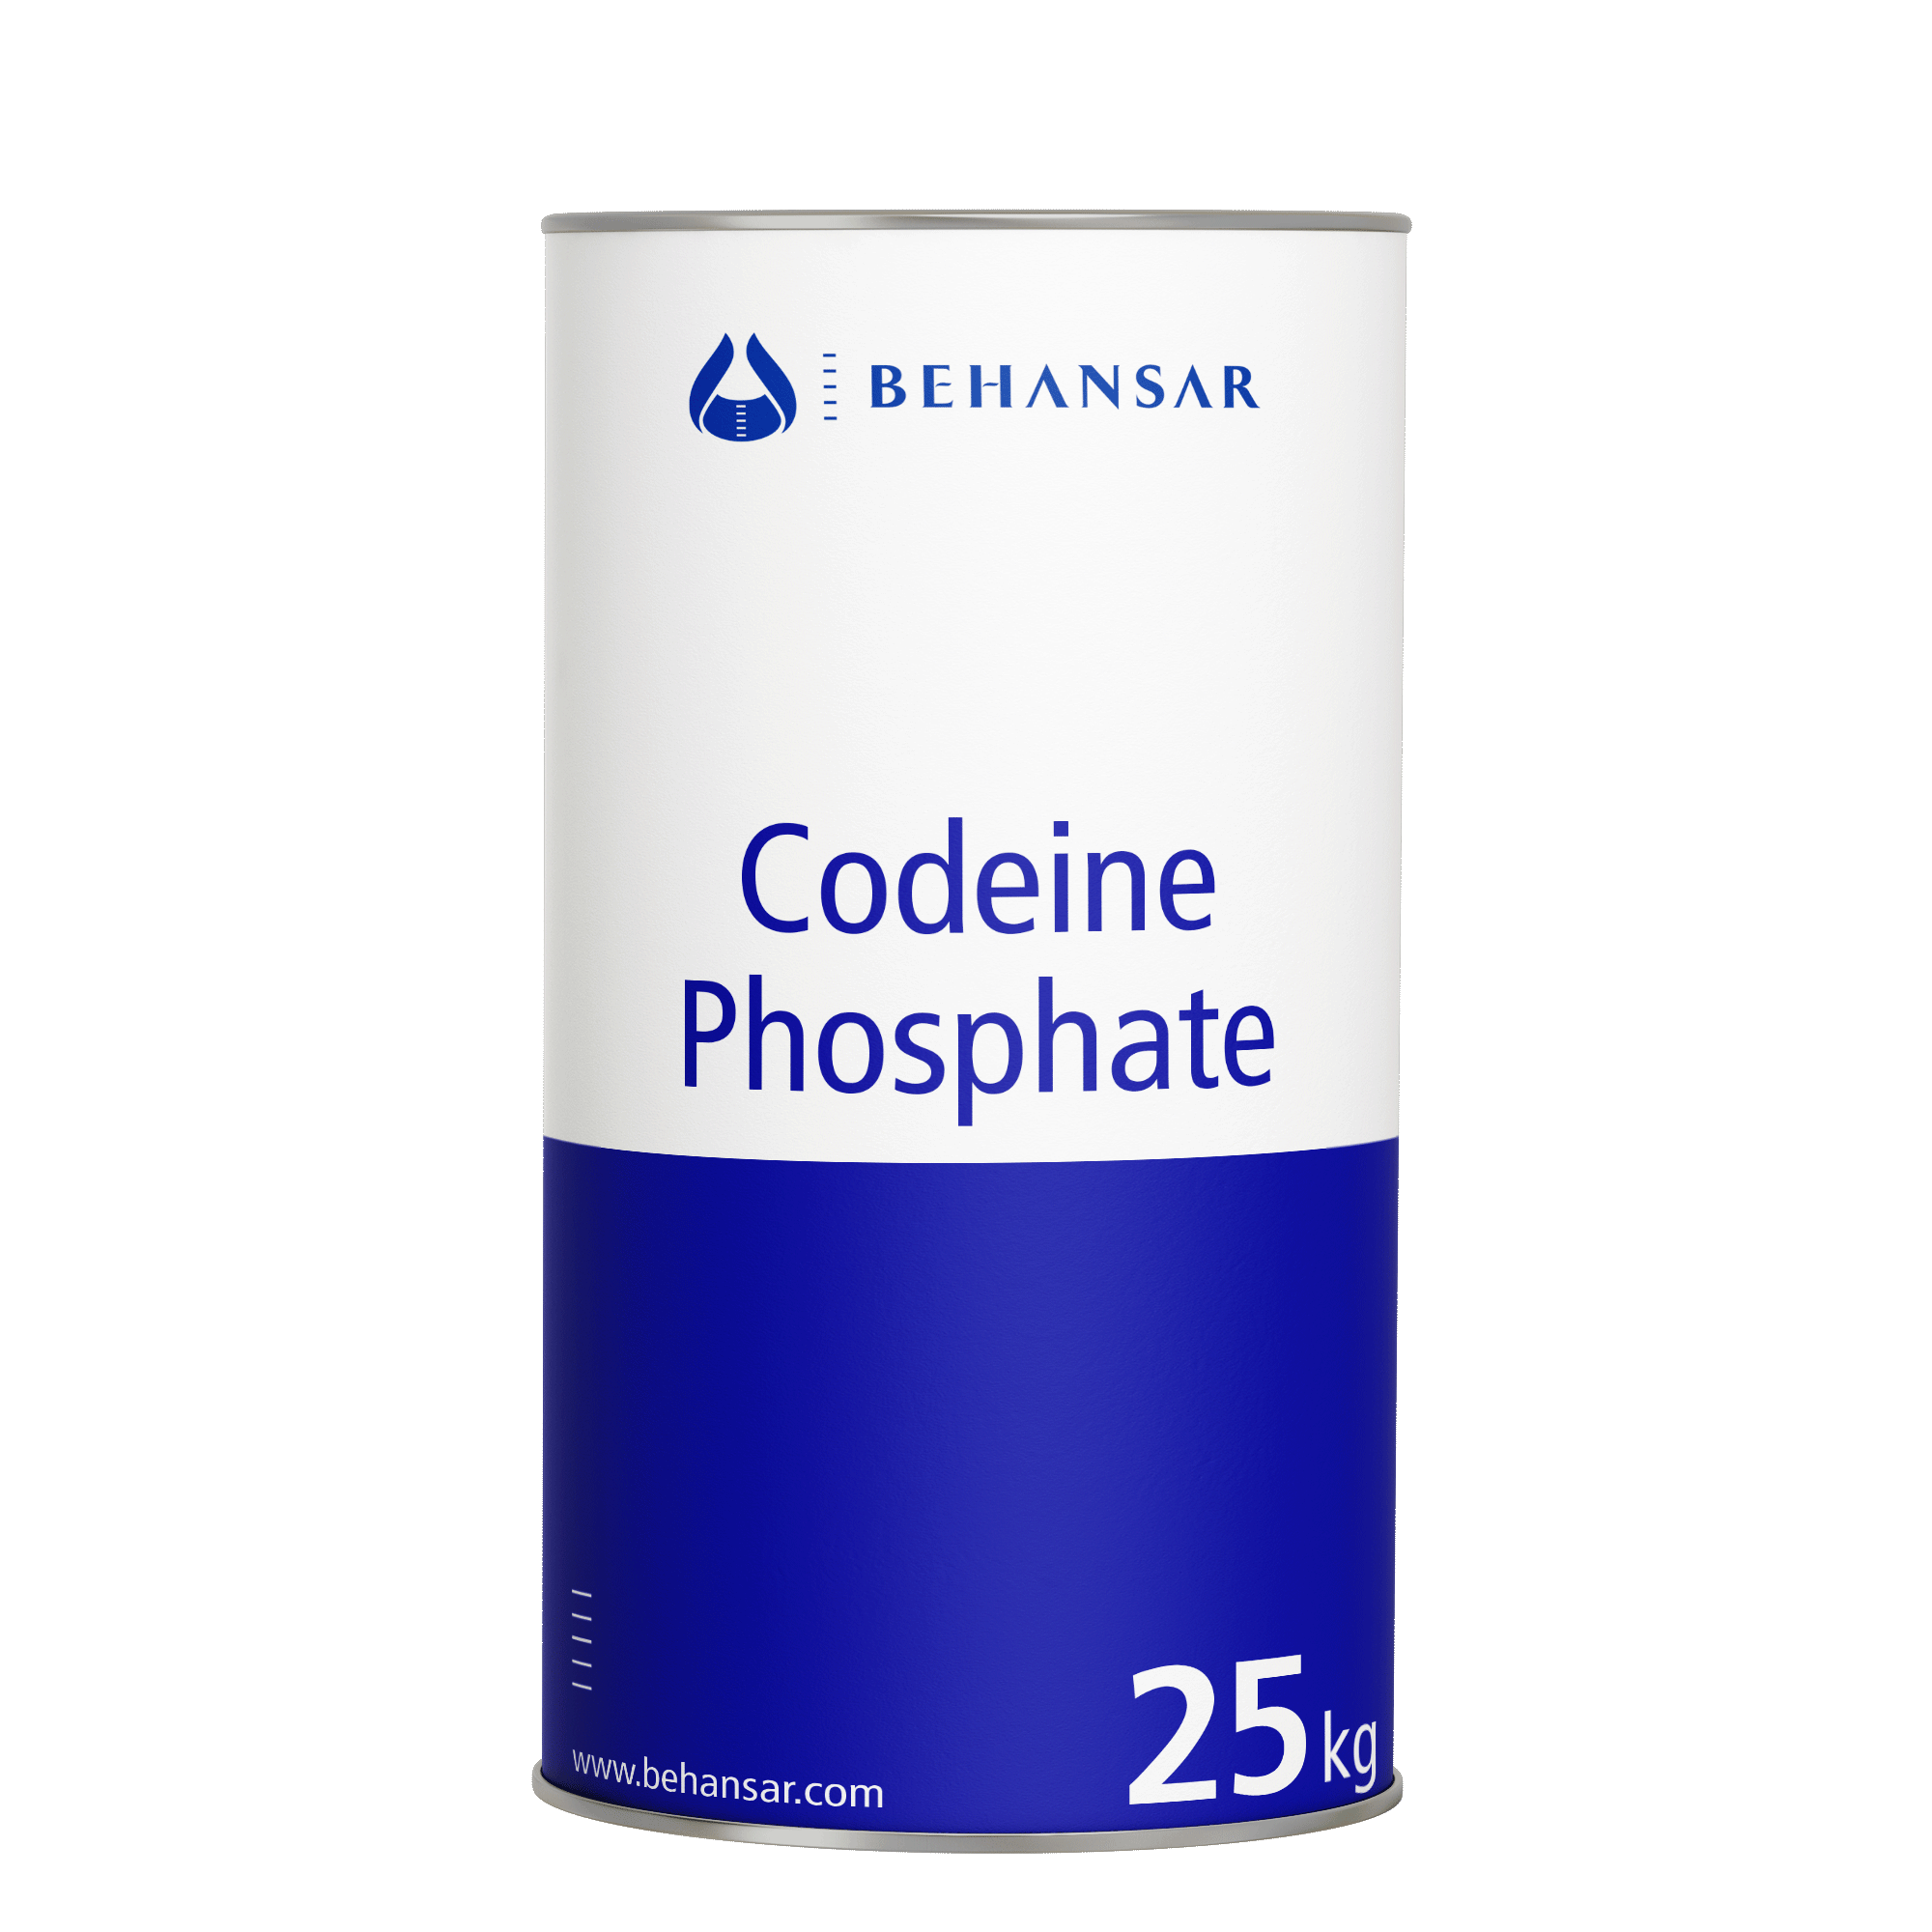 Codeine Phosphate is one of the products of Behansar Co